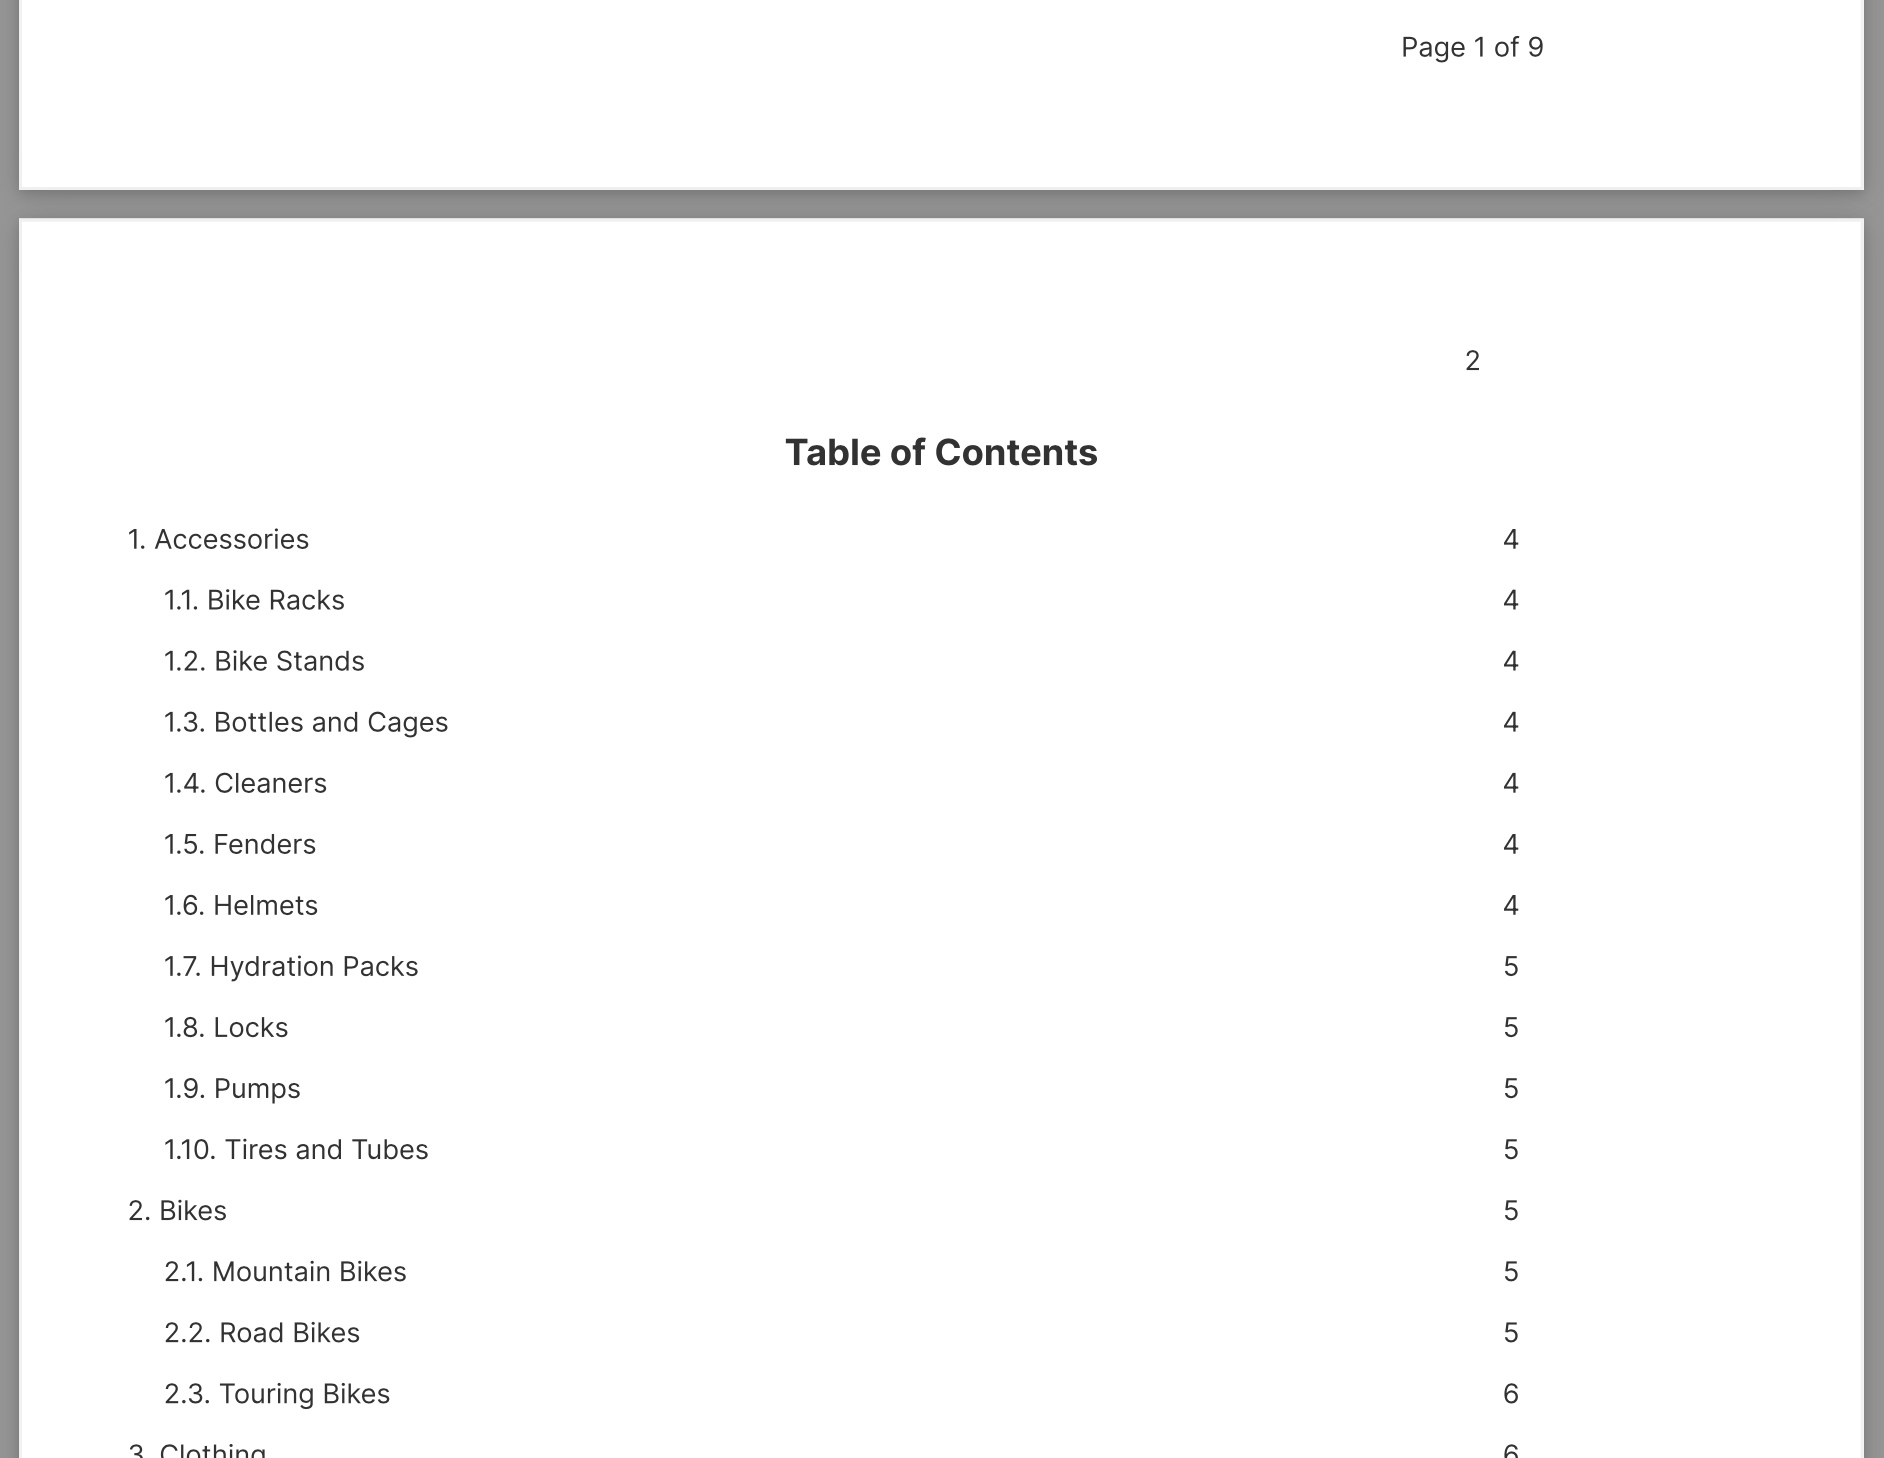 Viewing a table of contents in PDF format